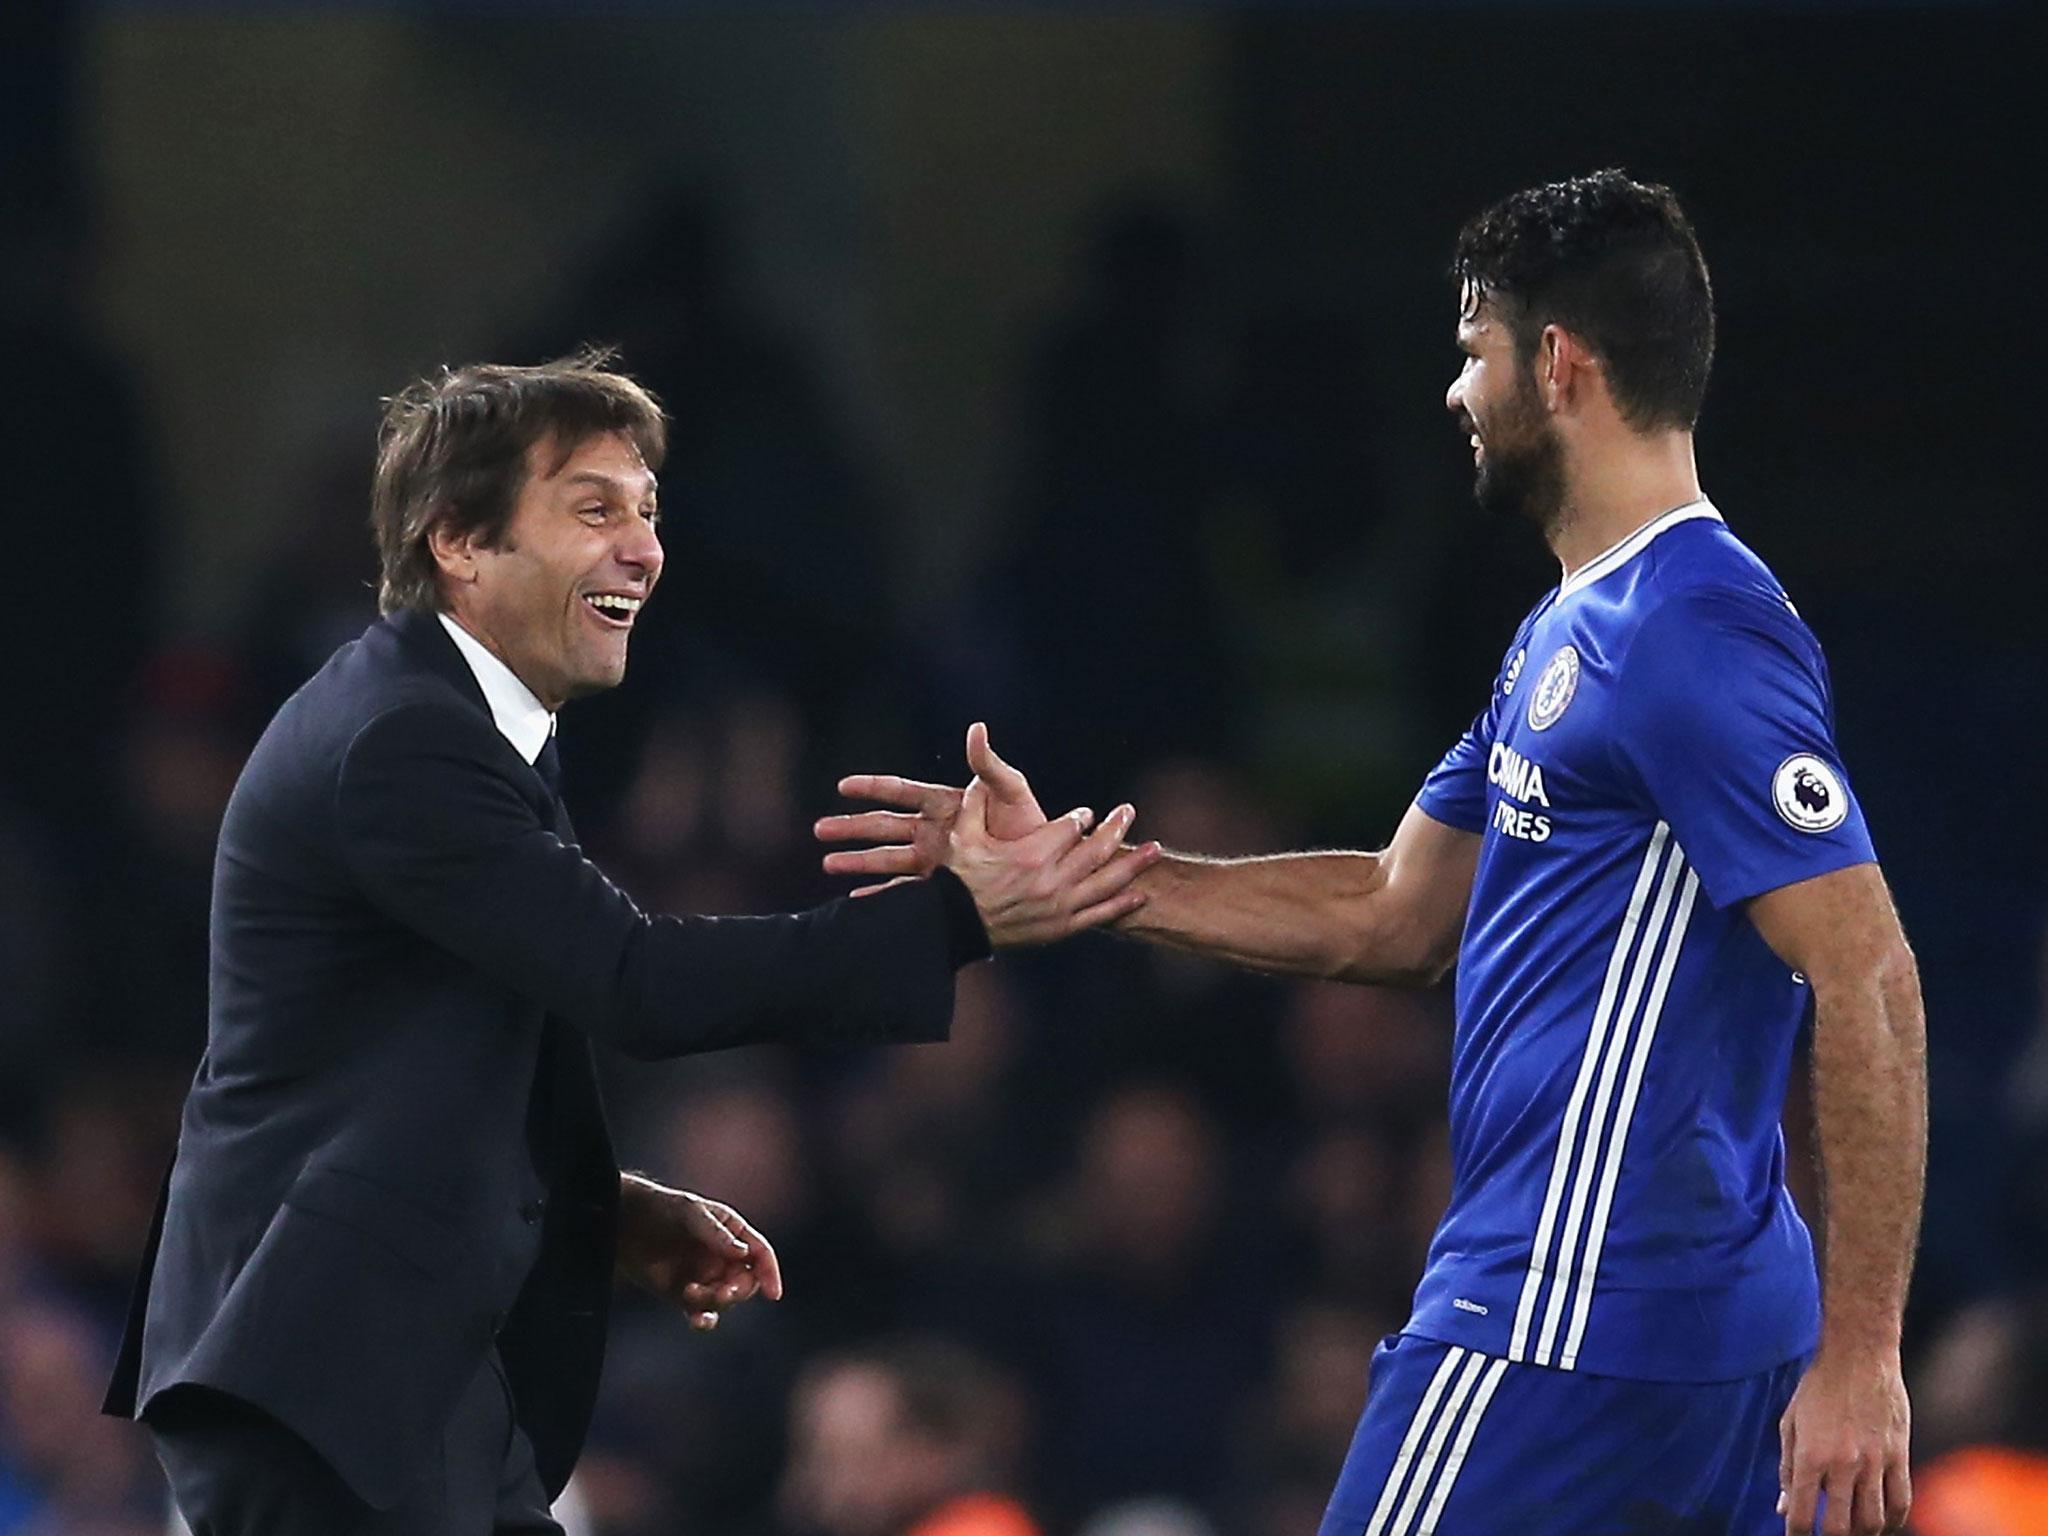 Chelsea manager Antonio Conte congratulates Diego Costa after their side's win over Stoke on New Year's Eve